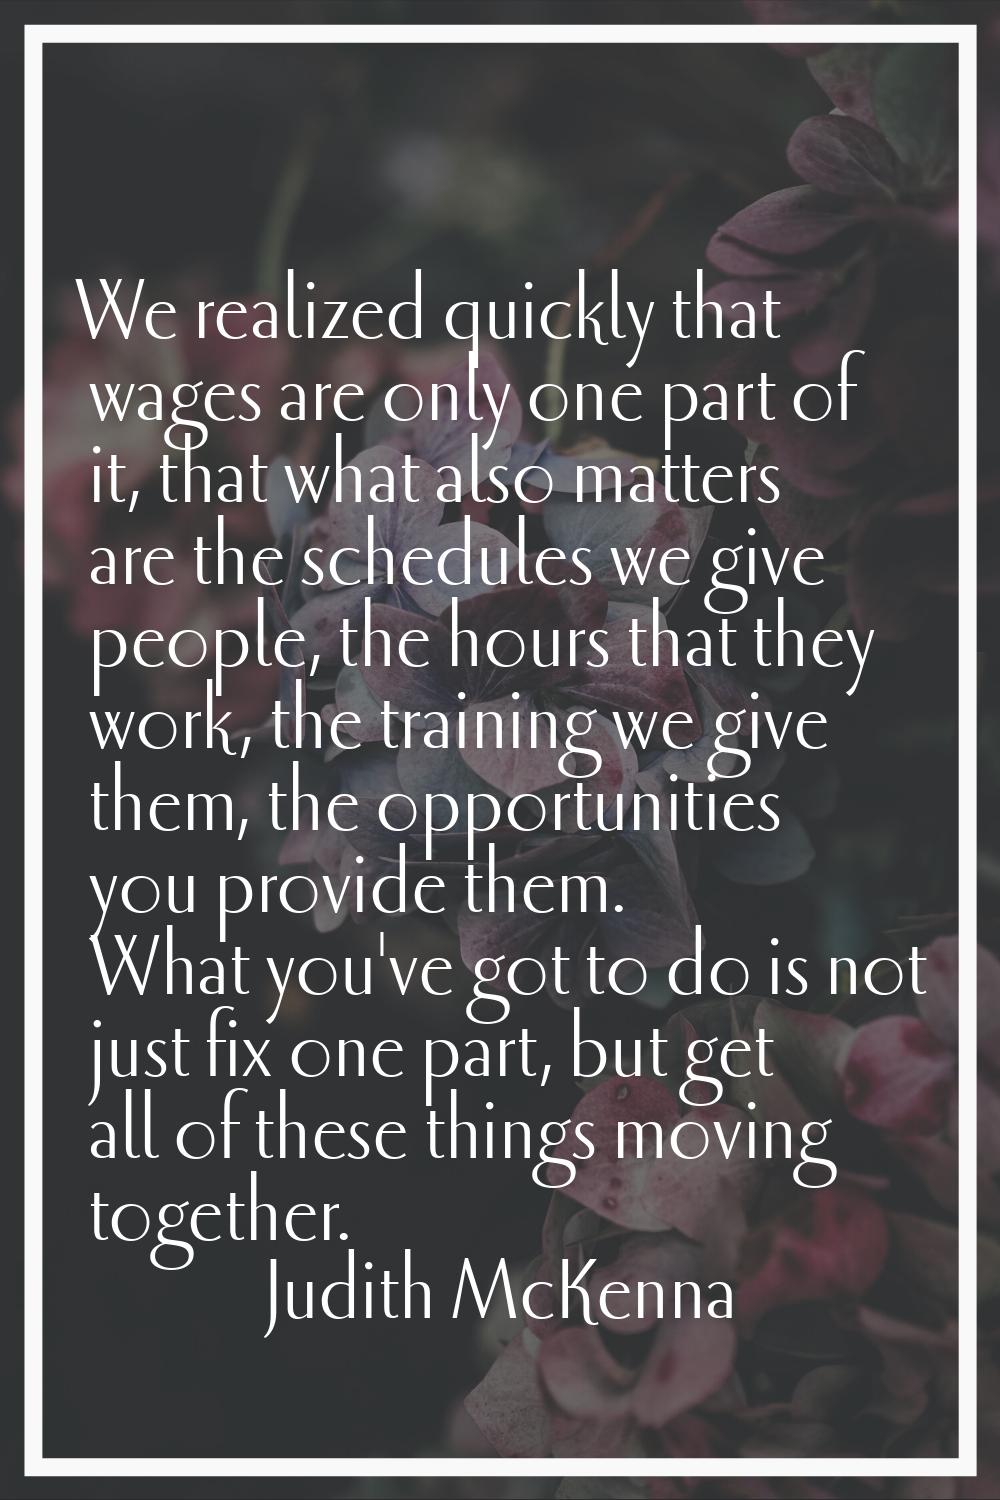 We realized quickly that wages are only one part of it, that what also matters are the schedules we